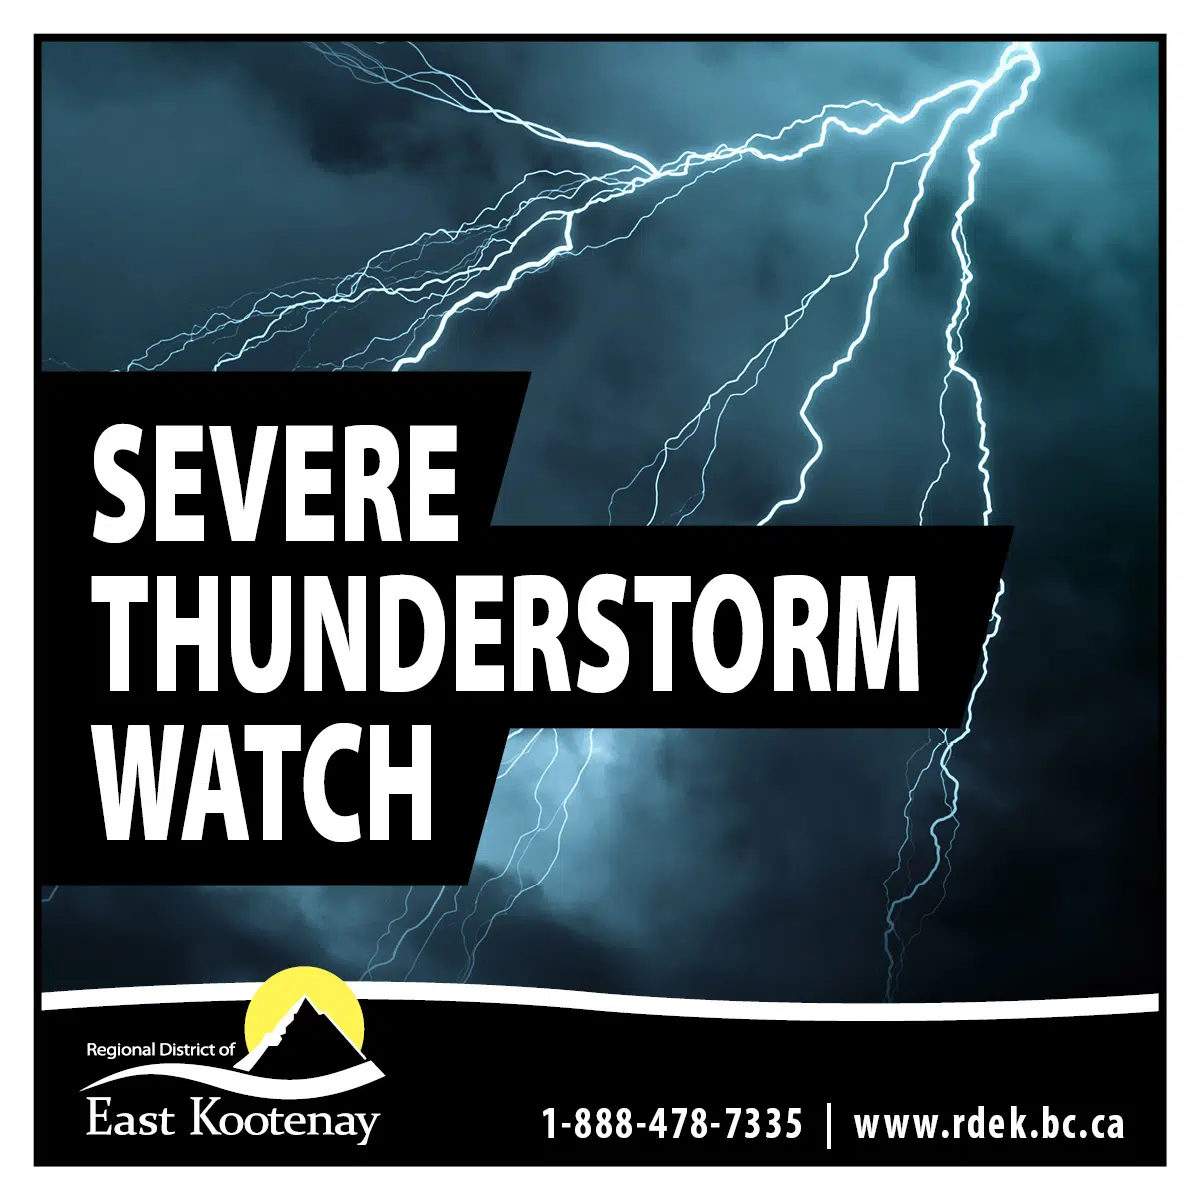 Severe Thunderstorm Watch Active For Invermere Area The Drive Fm